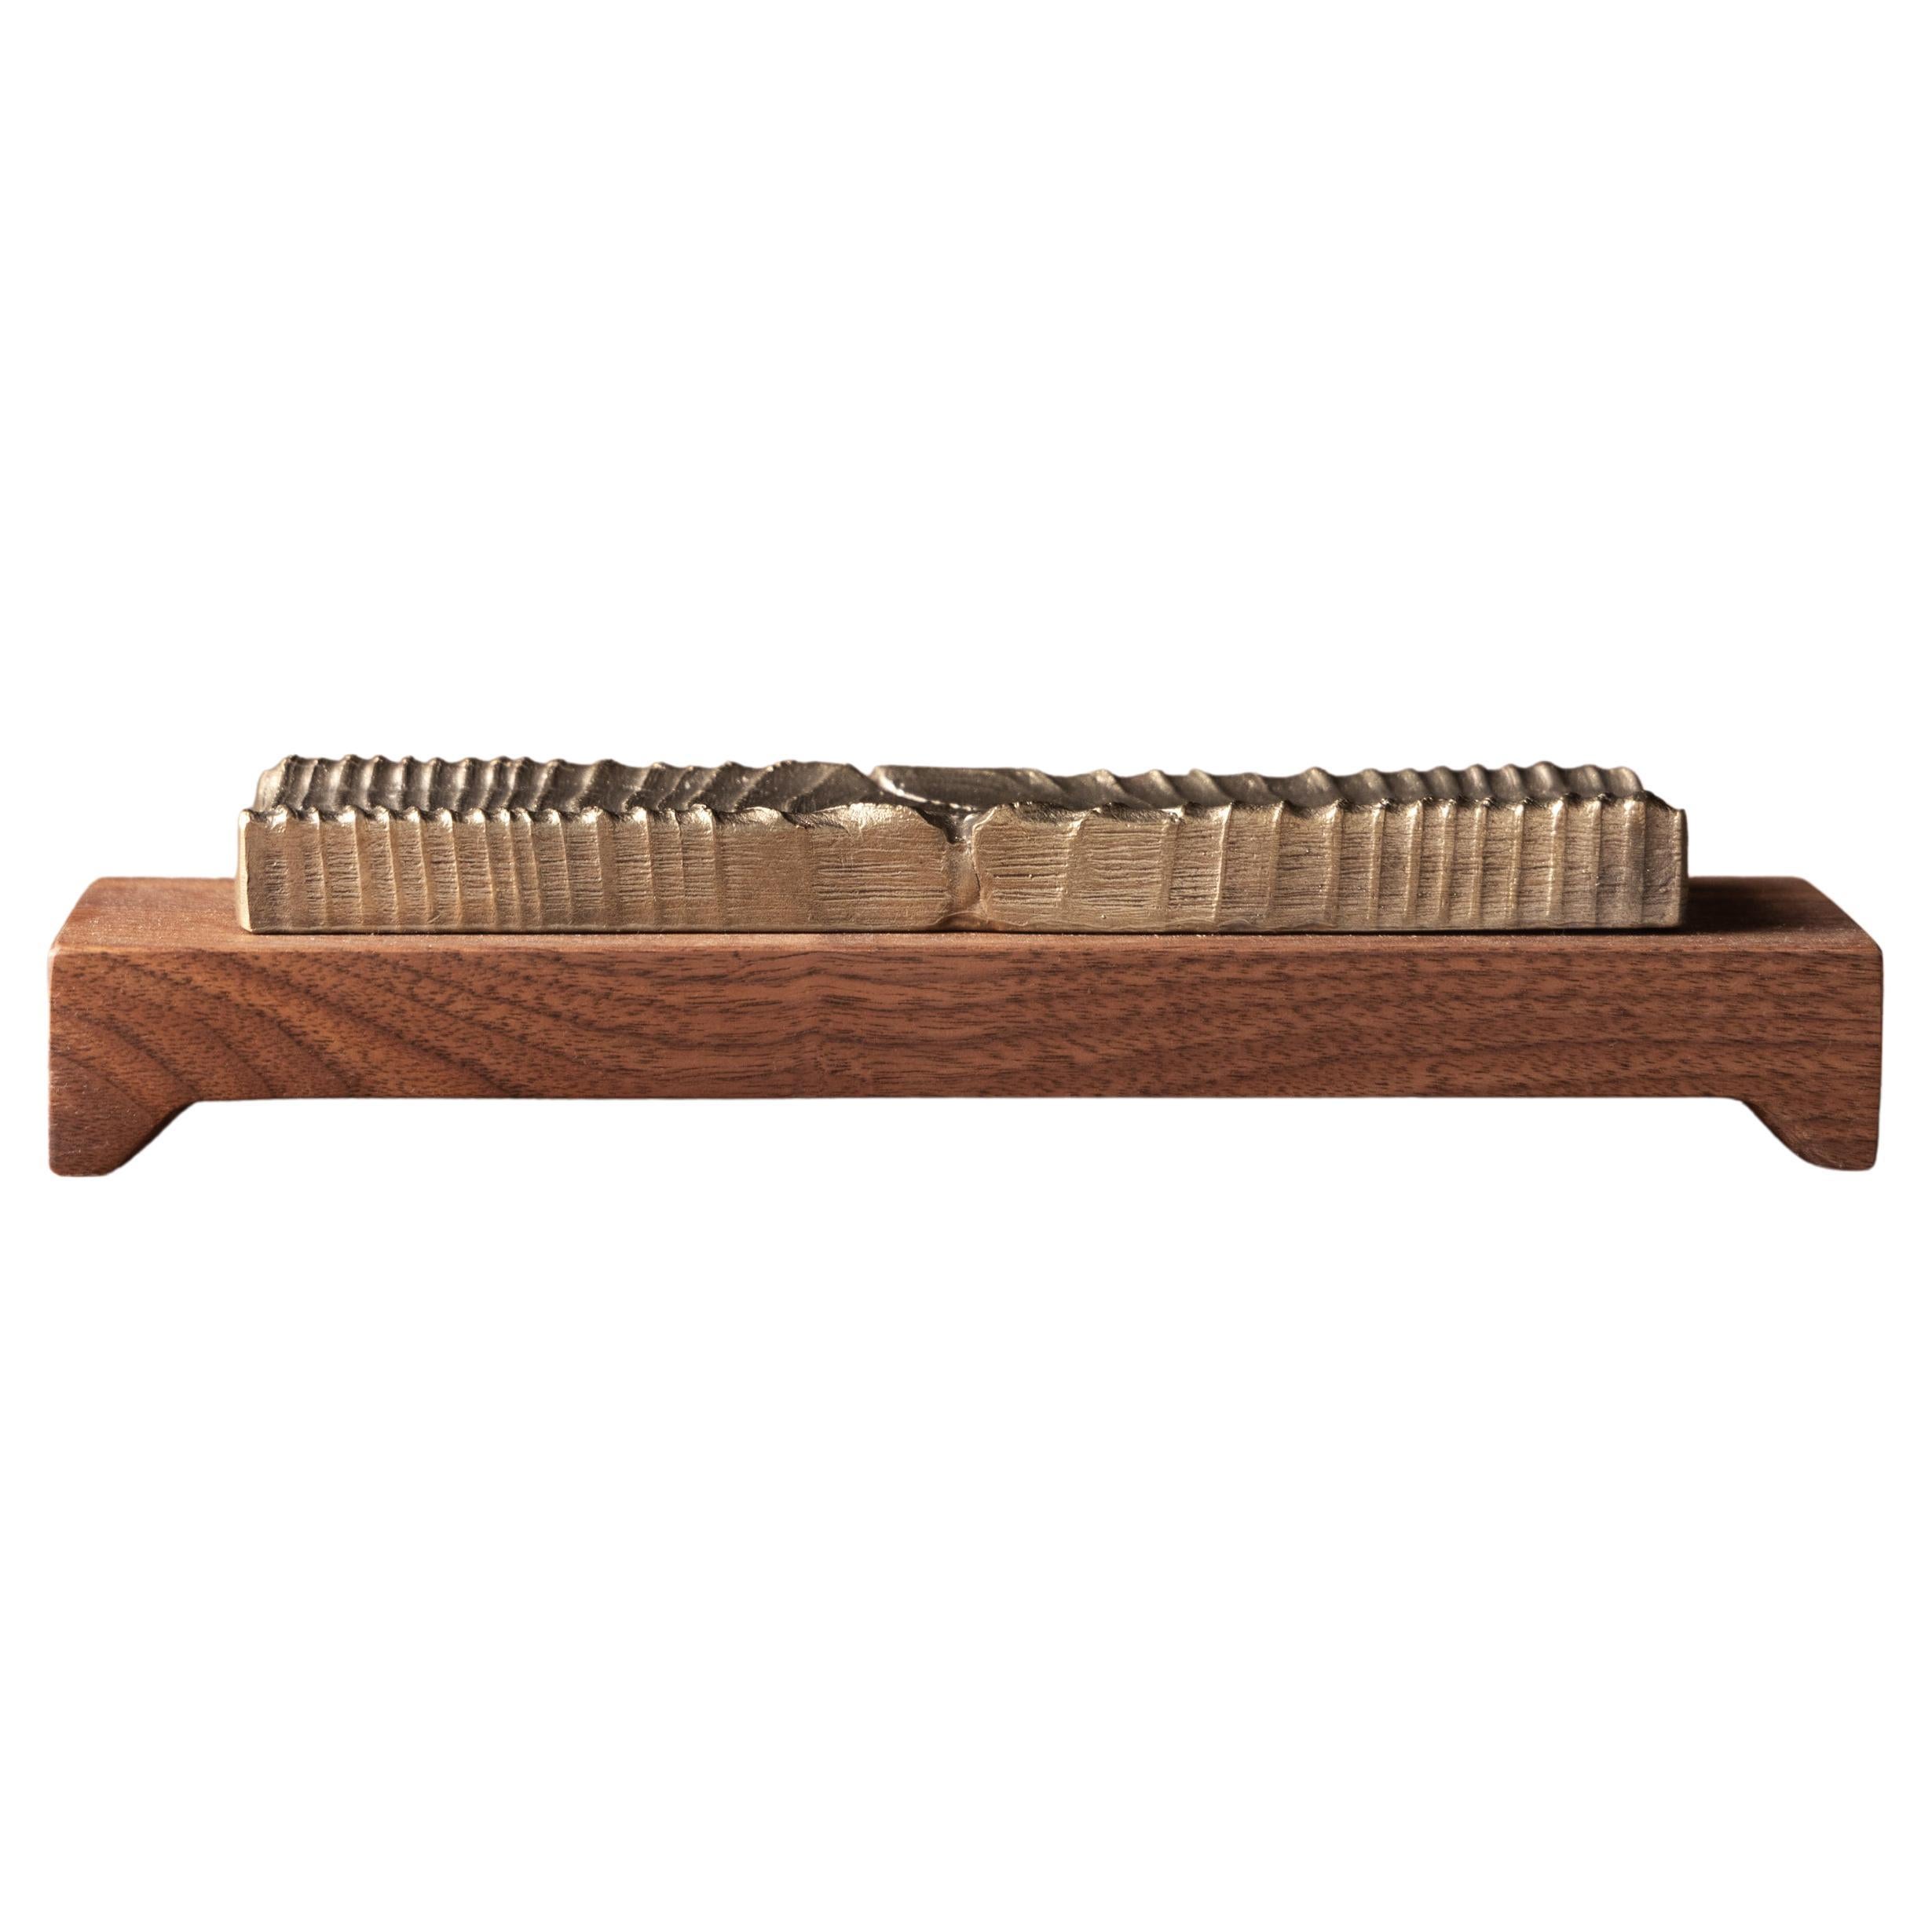 Incense Holder Modern Walnut Wood and Bronze Casting with Bright Finish